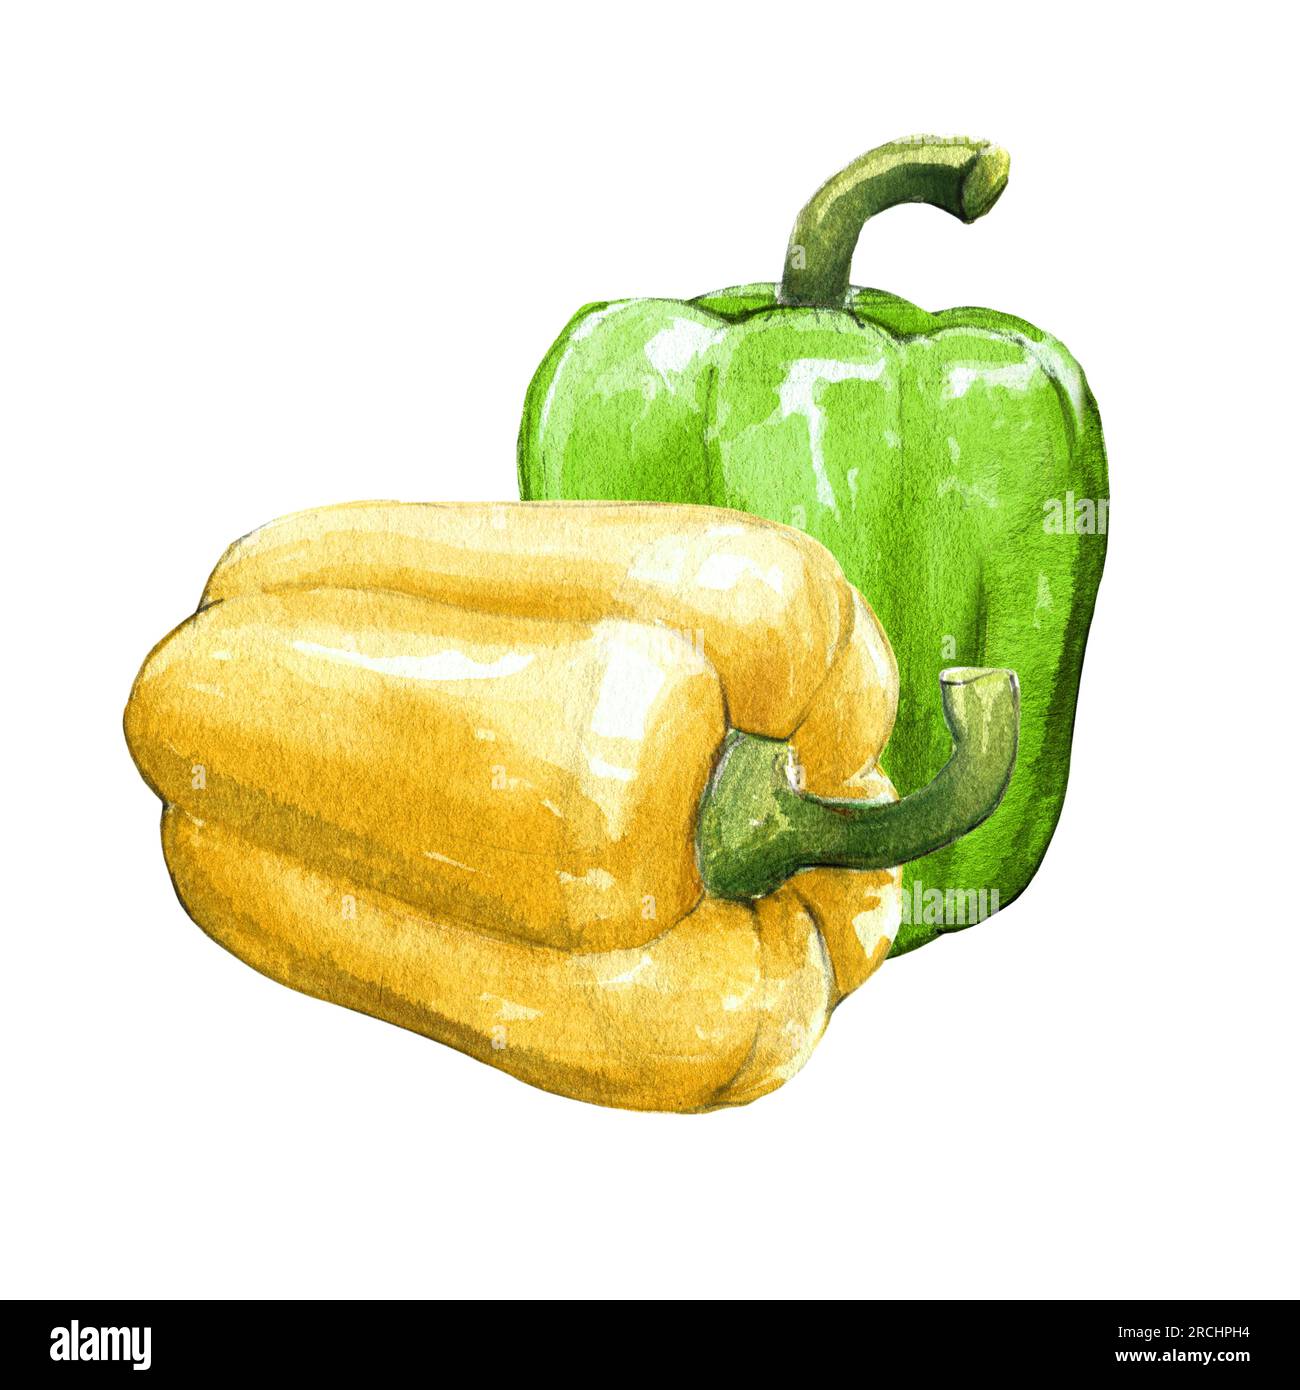 yellow bell pepper watercolor illustration on white background Stock Photo